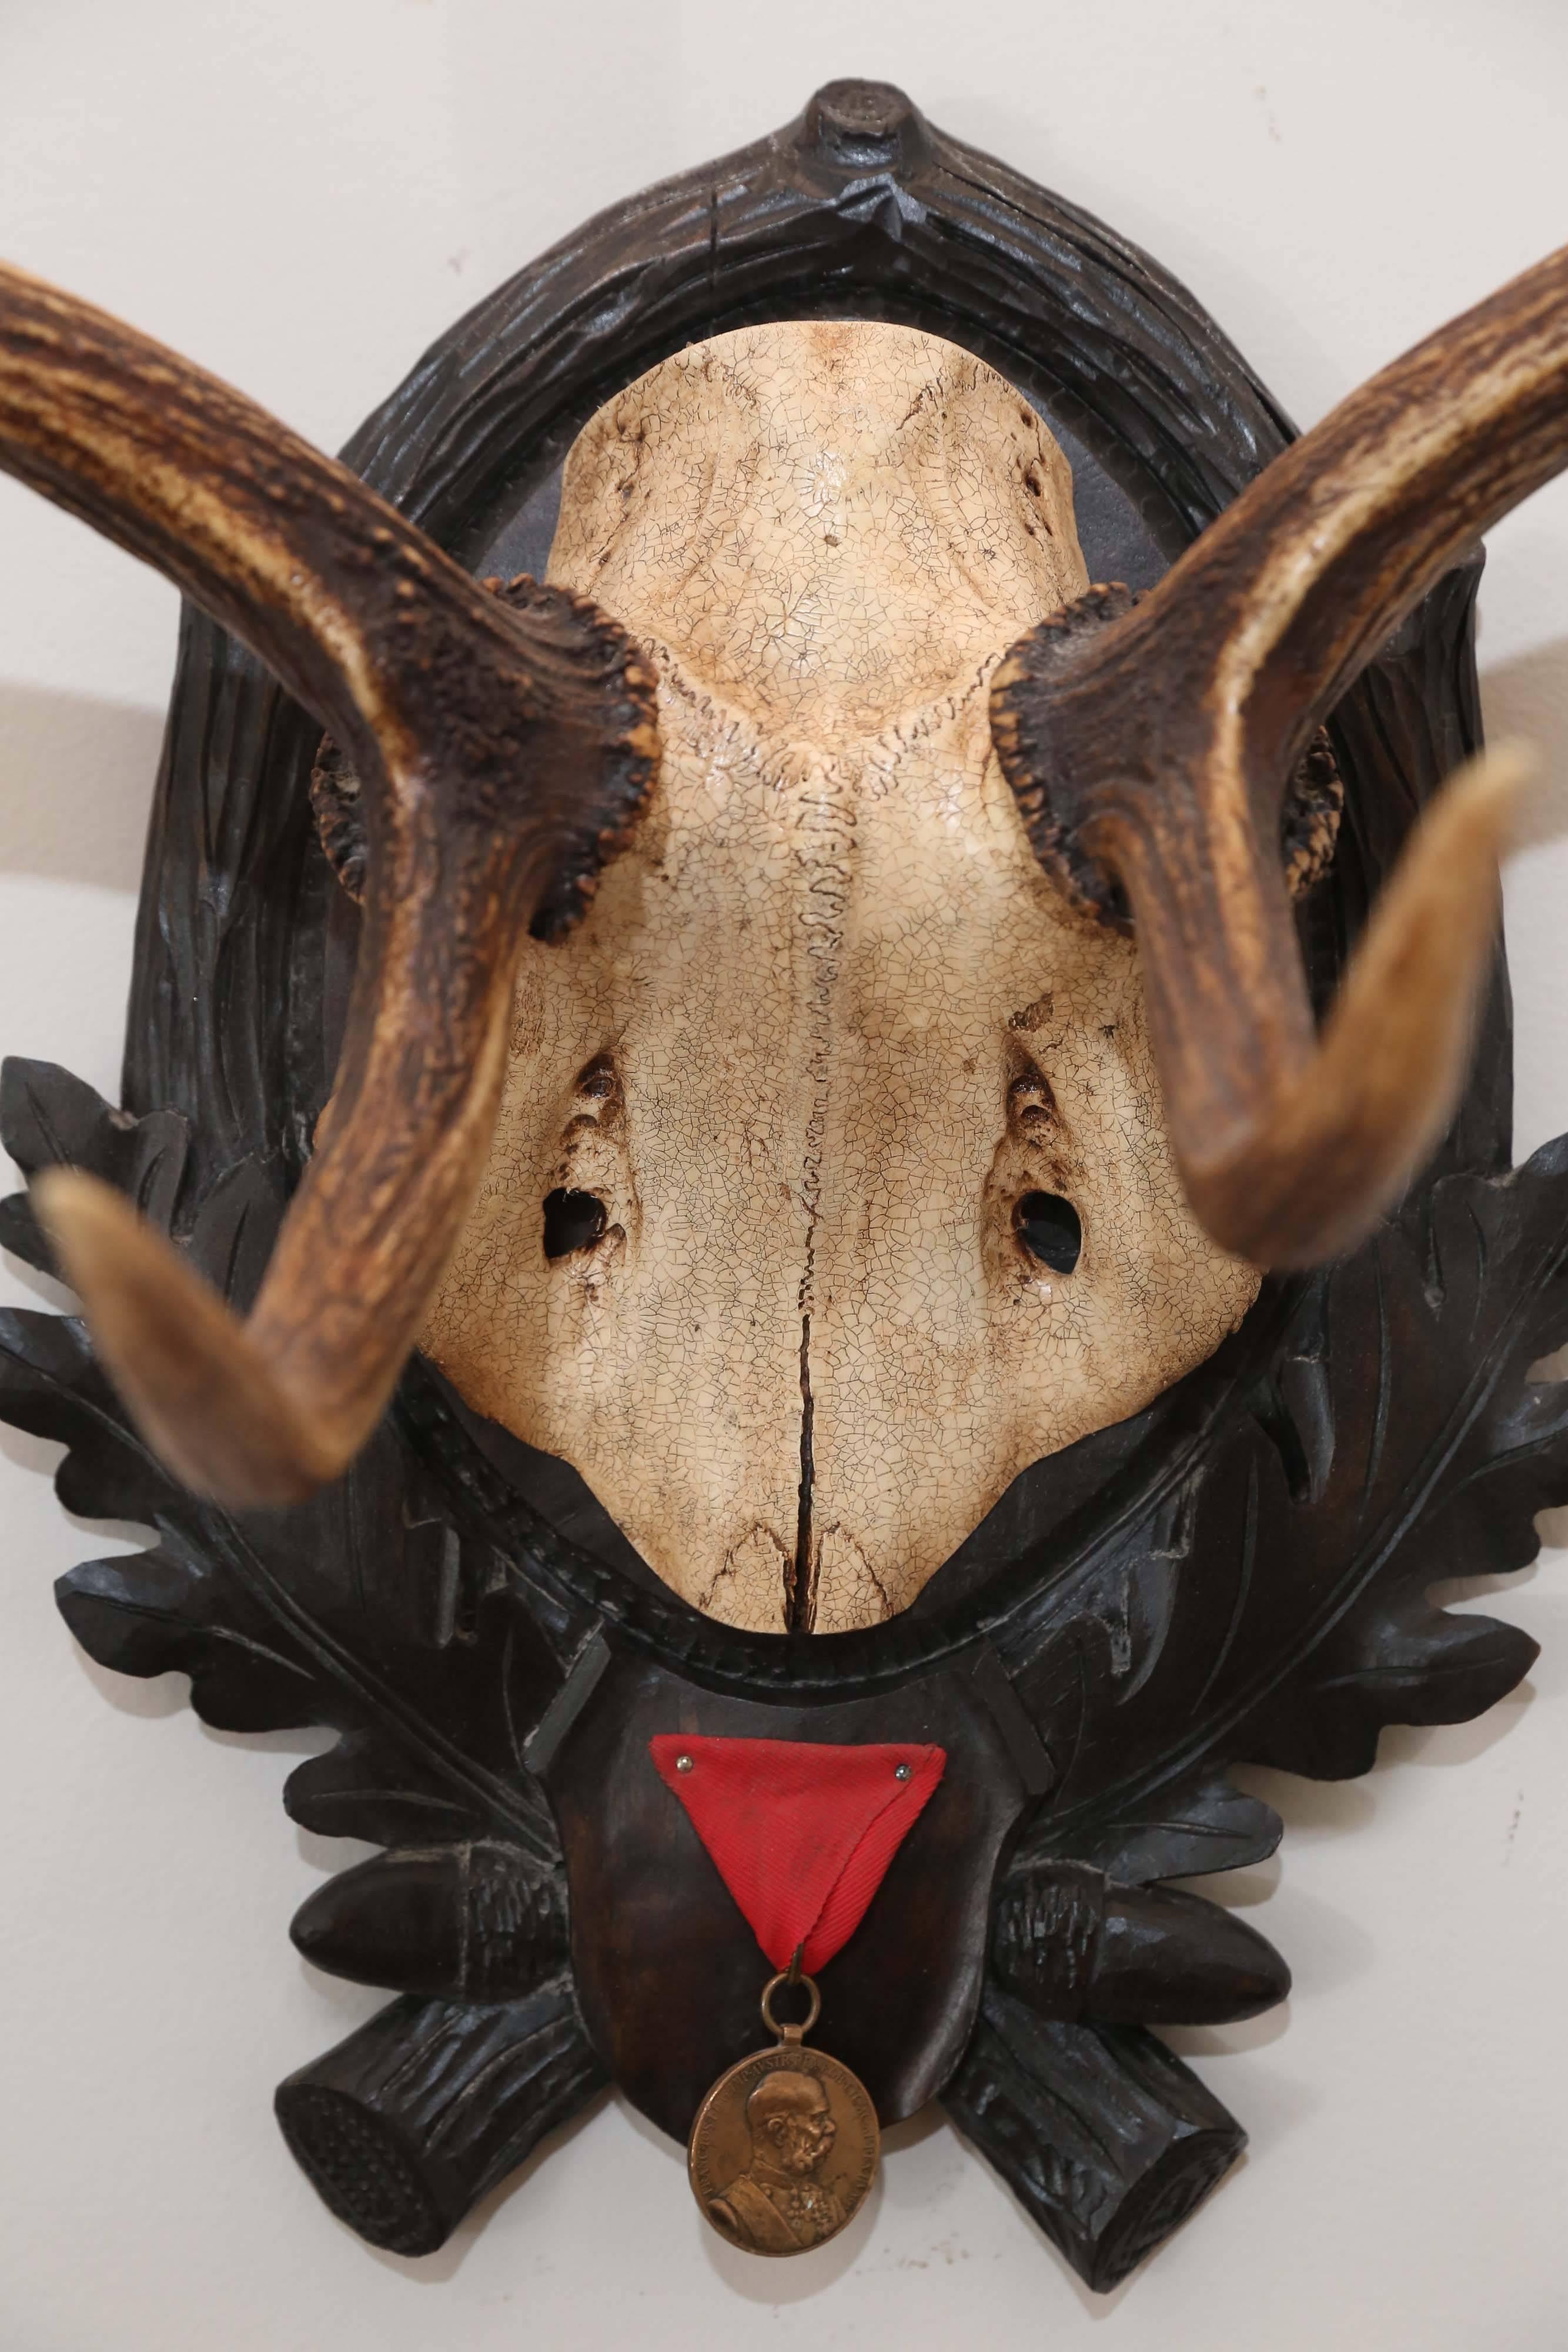 19th century fallow deer trophy from Emperor Franz Josef's castle at Eckartsau in the Southern Austrian Alps, a favorite hunting schloss of the Habsburg Royal family. This historic hunting trophy features the original black forest carved plaque and